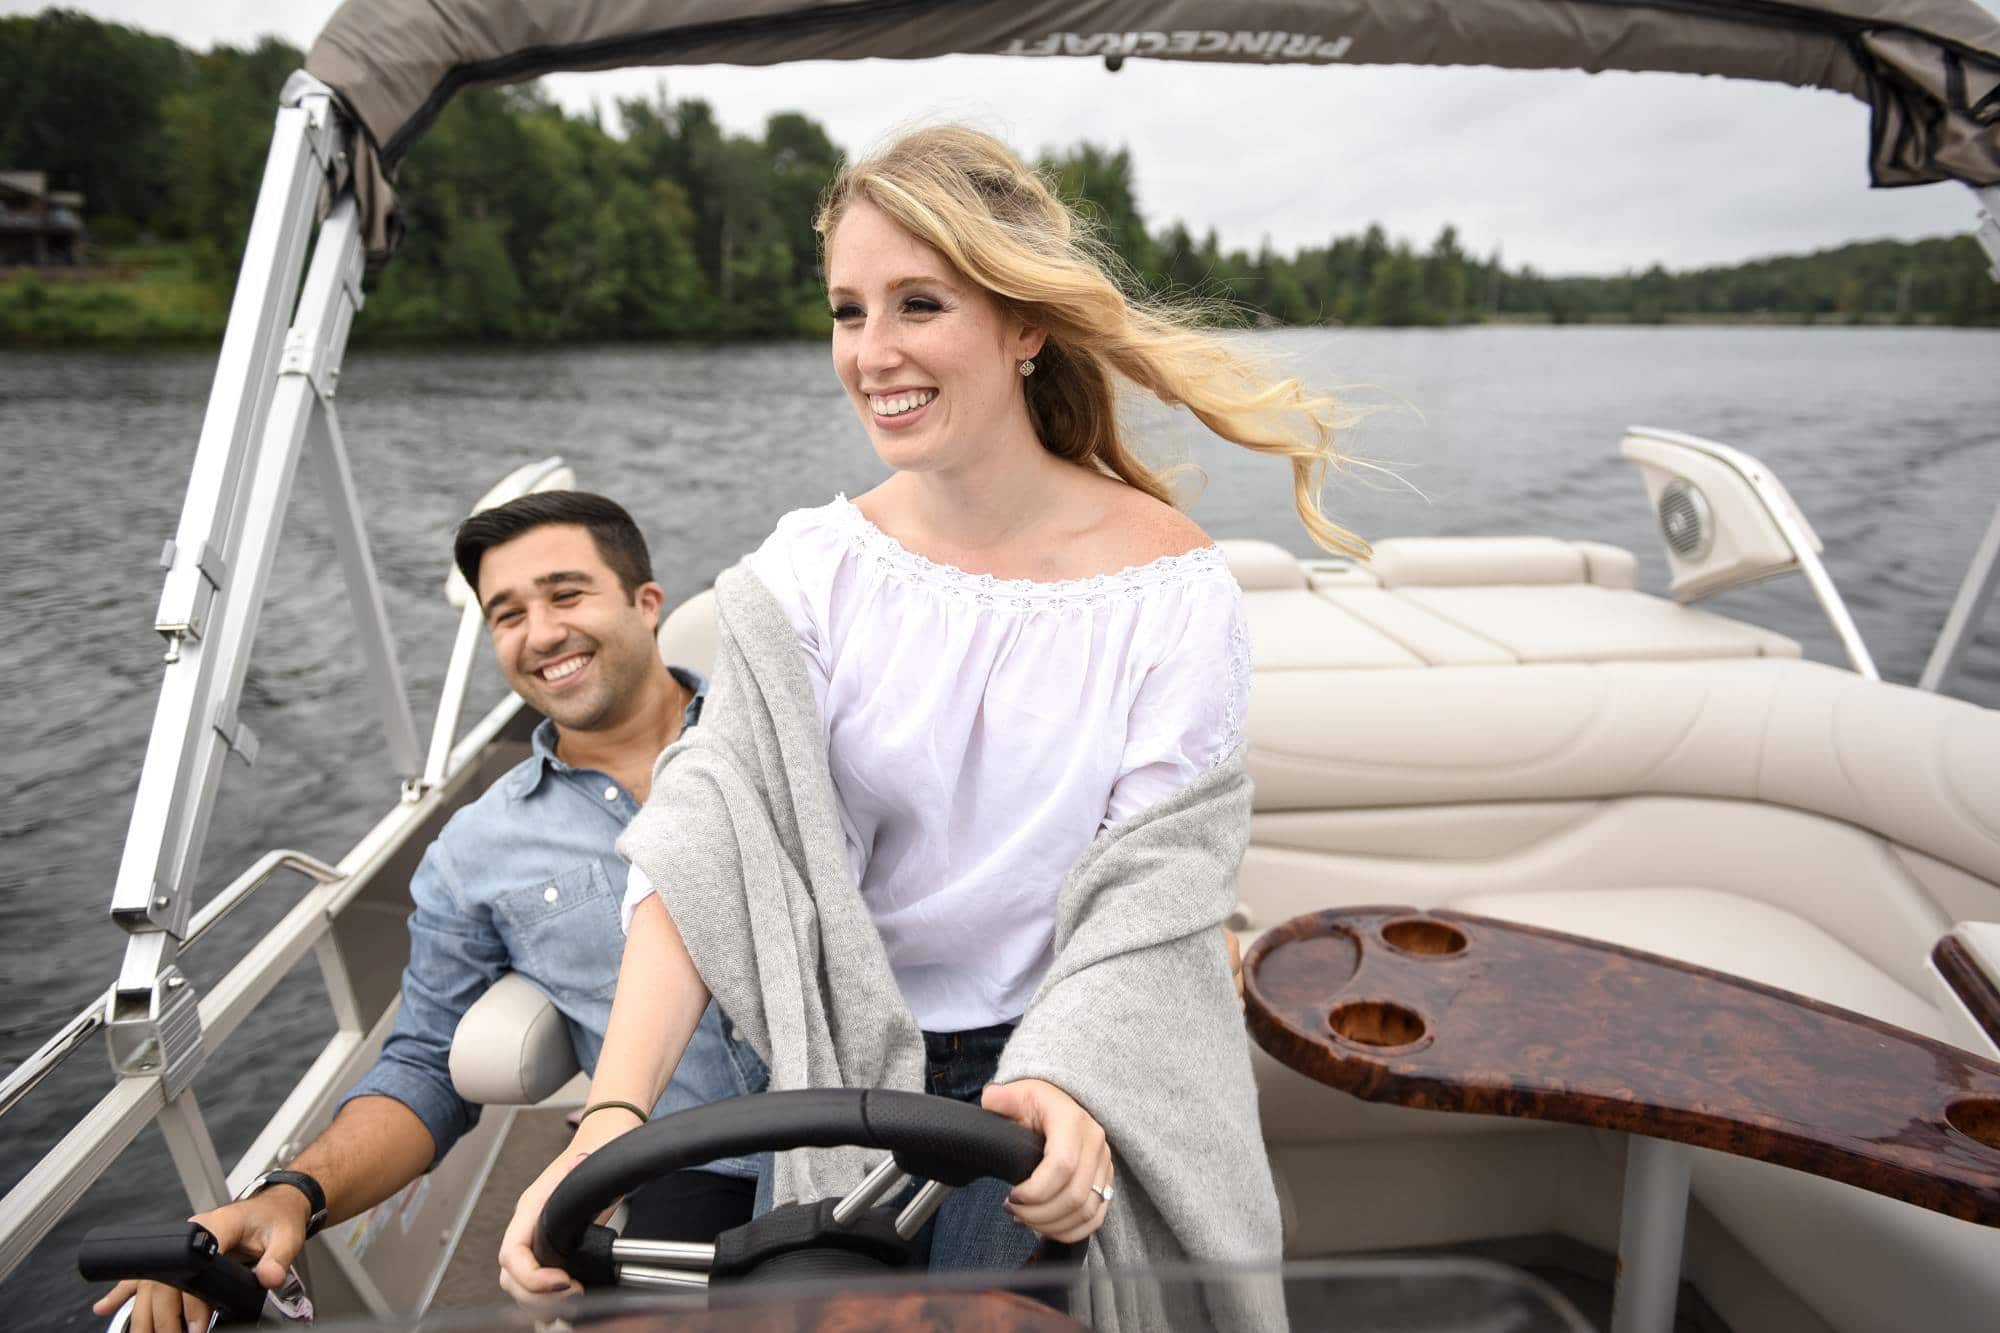 jacklyn bryan jewish engagement esession shoot photos love cute hot couple casual montreal laurentides esterel location boat driving flowing wind